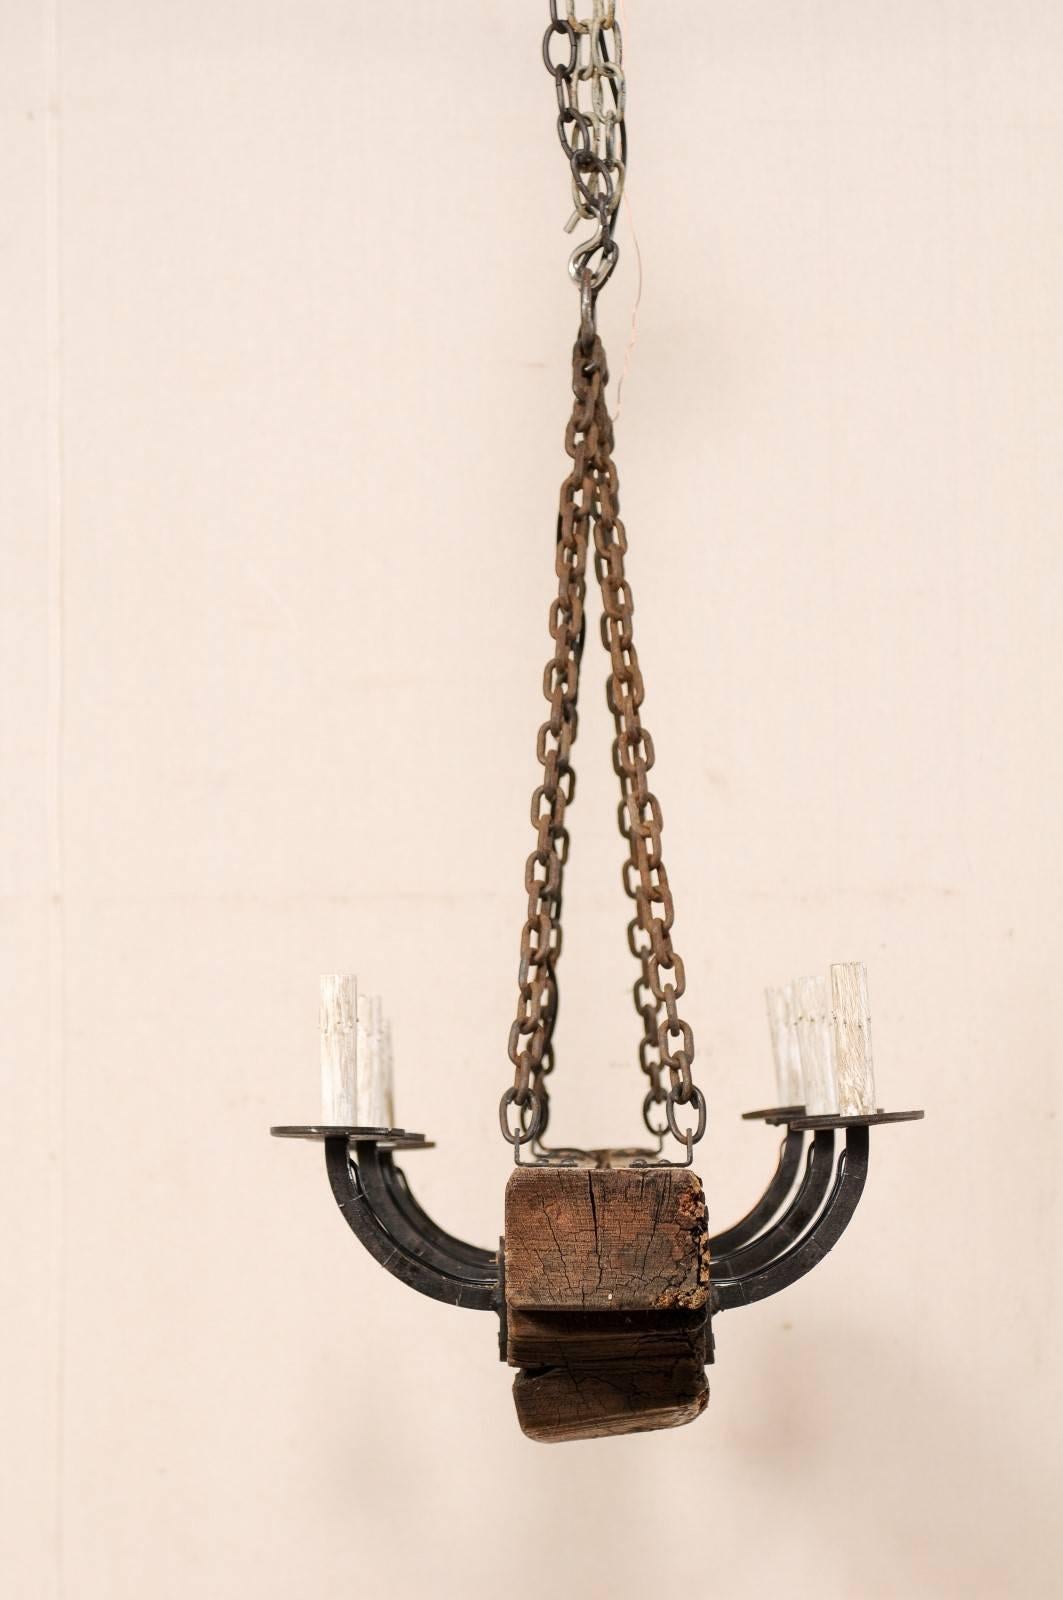 20th Century French Rustic Wood Beam Chandelier with Six Forged Iron Arms, Mid 20th C. For Sale